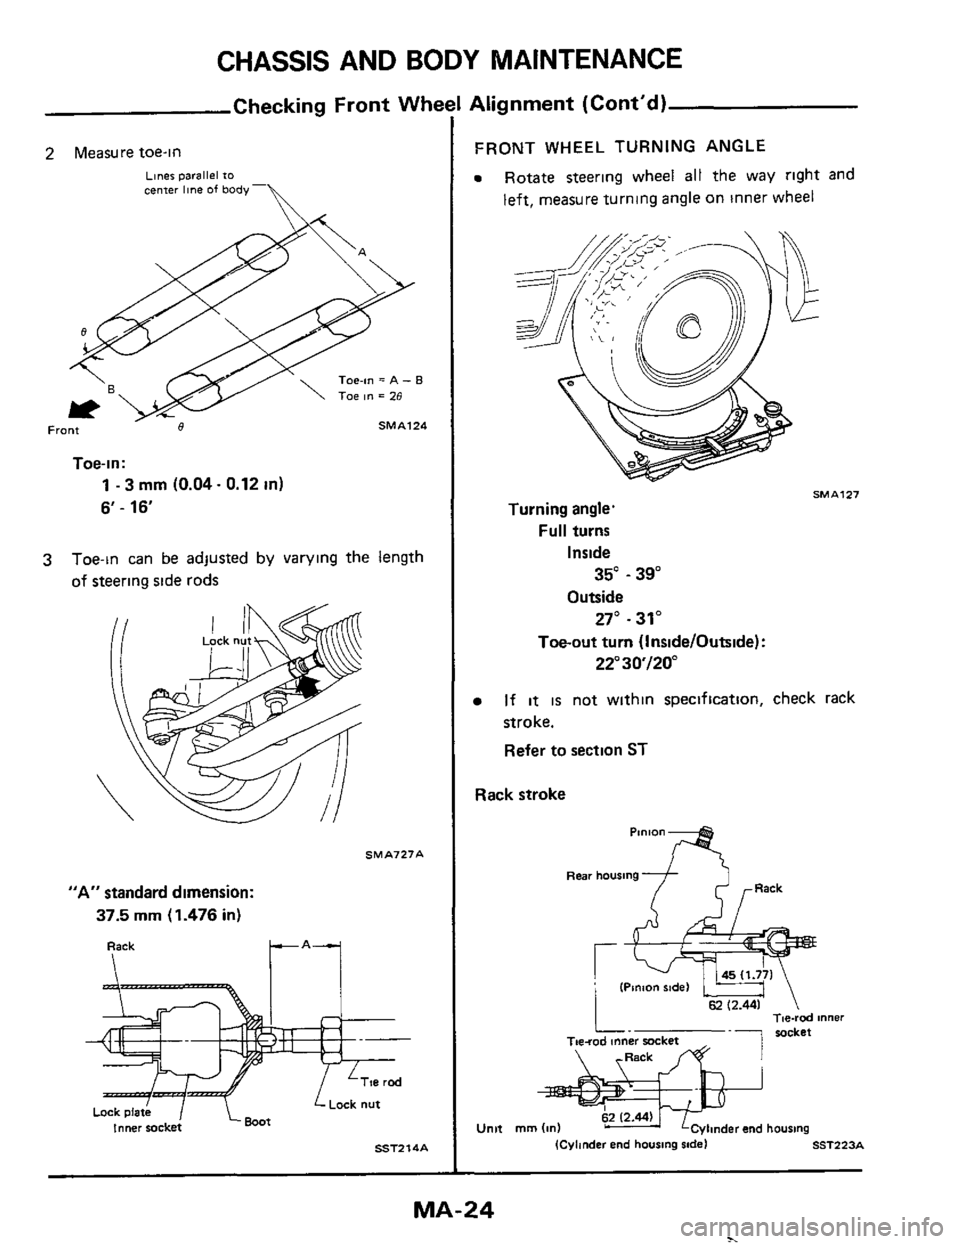 NISSAN 300ZX 1984 Z31 Maintenance Workshop Manual CHASSIS AND BODY  MAINTENANCE 
Checking  Front Whe 
2 Measure toe-in 
Liner parallel to center line of body- 
Toe-in = A - 8 
SMA124 Front 
Toe-in: 
1 - 3 mm (0.04. 0.12 in) 
6-16 
3 Town can be adjus